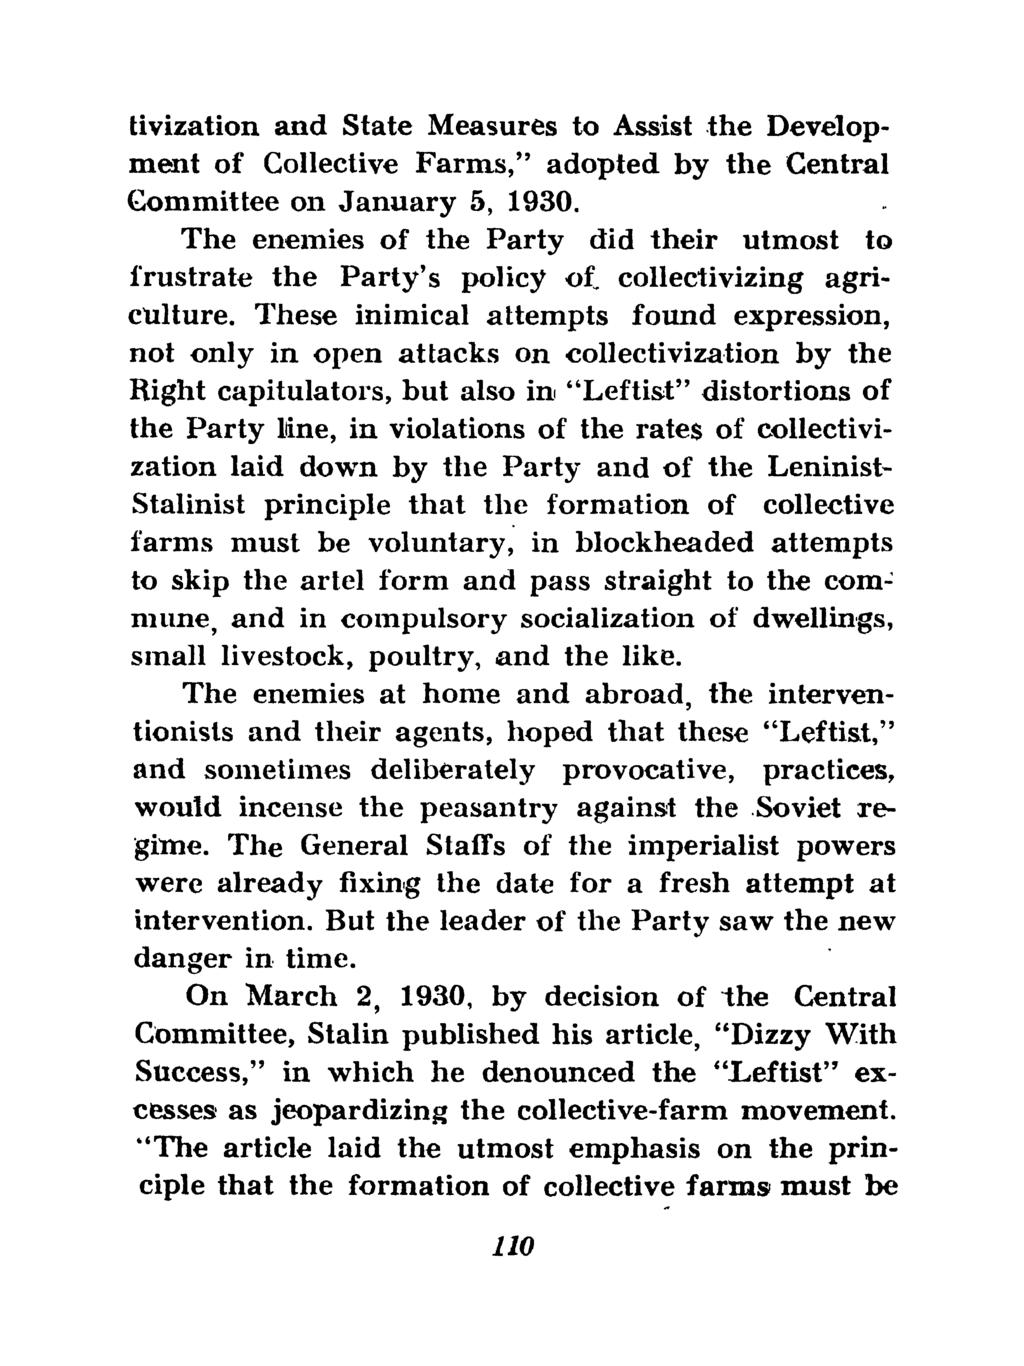 tivization and State Measures to Assist the Development of Collective Farms," adopted by the Central Committee on January 5, 1930.